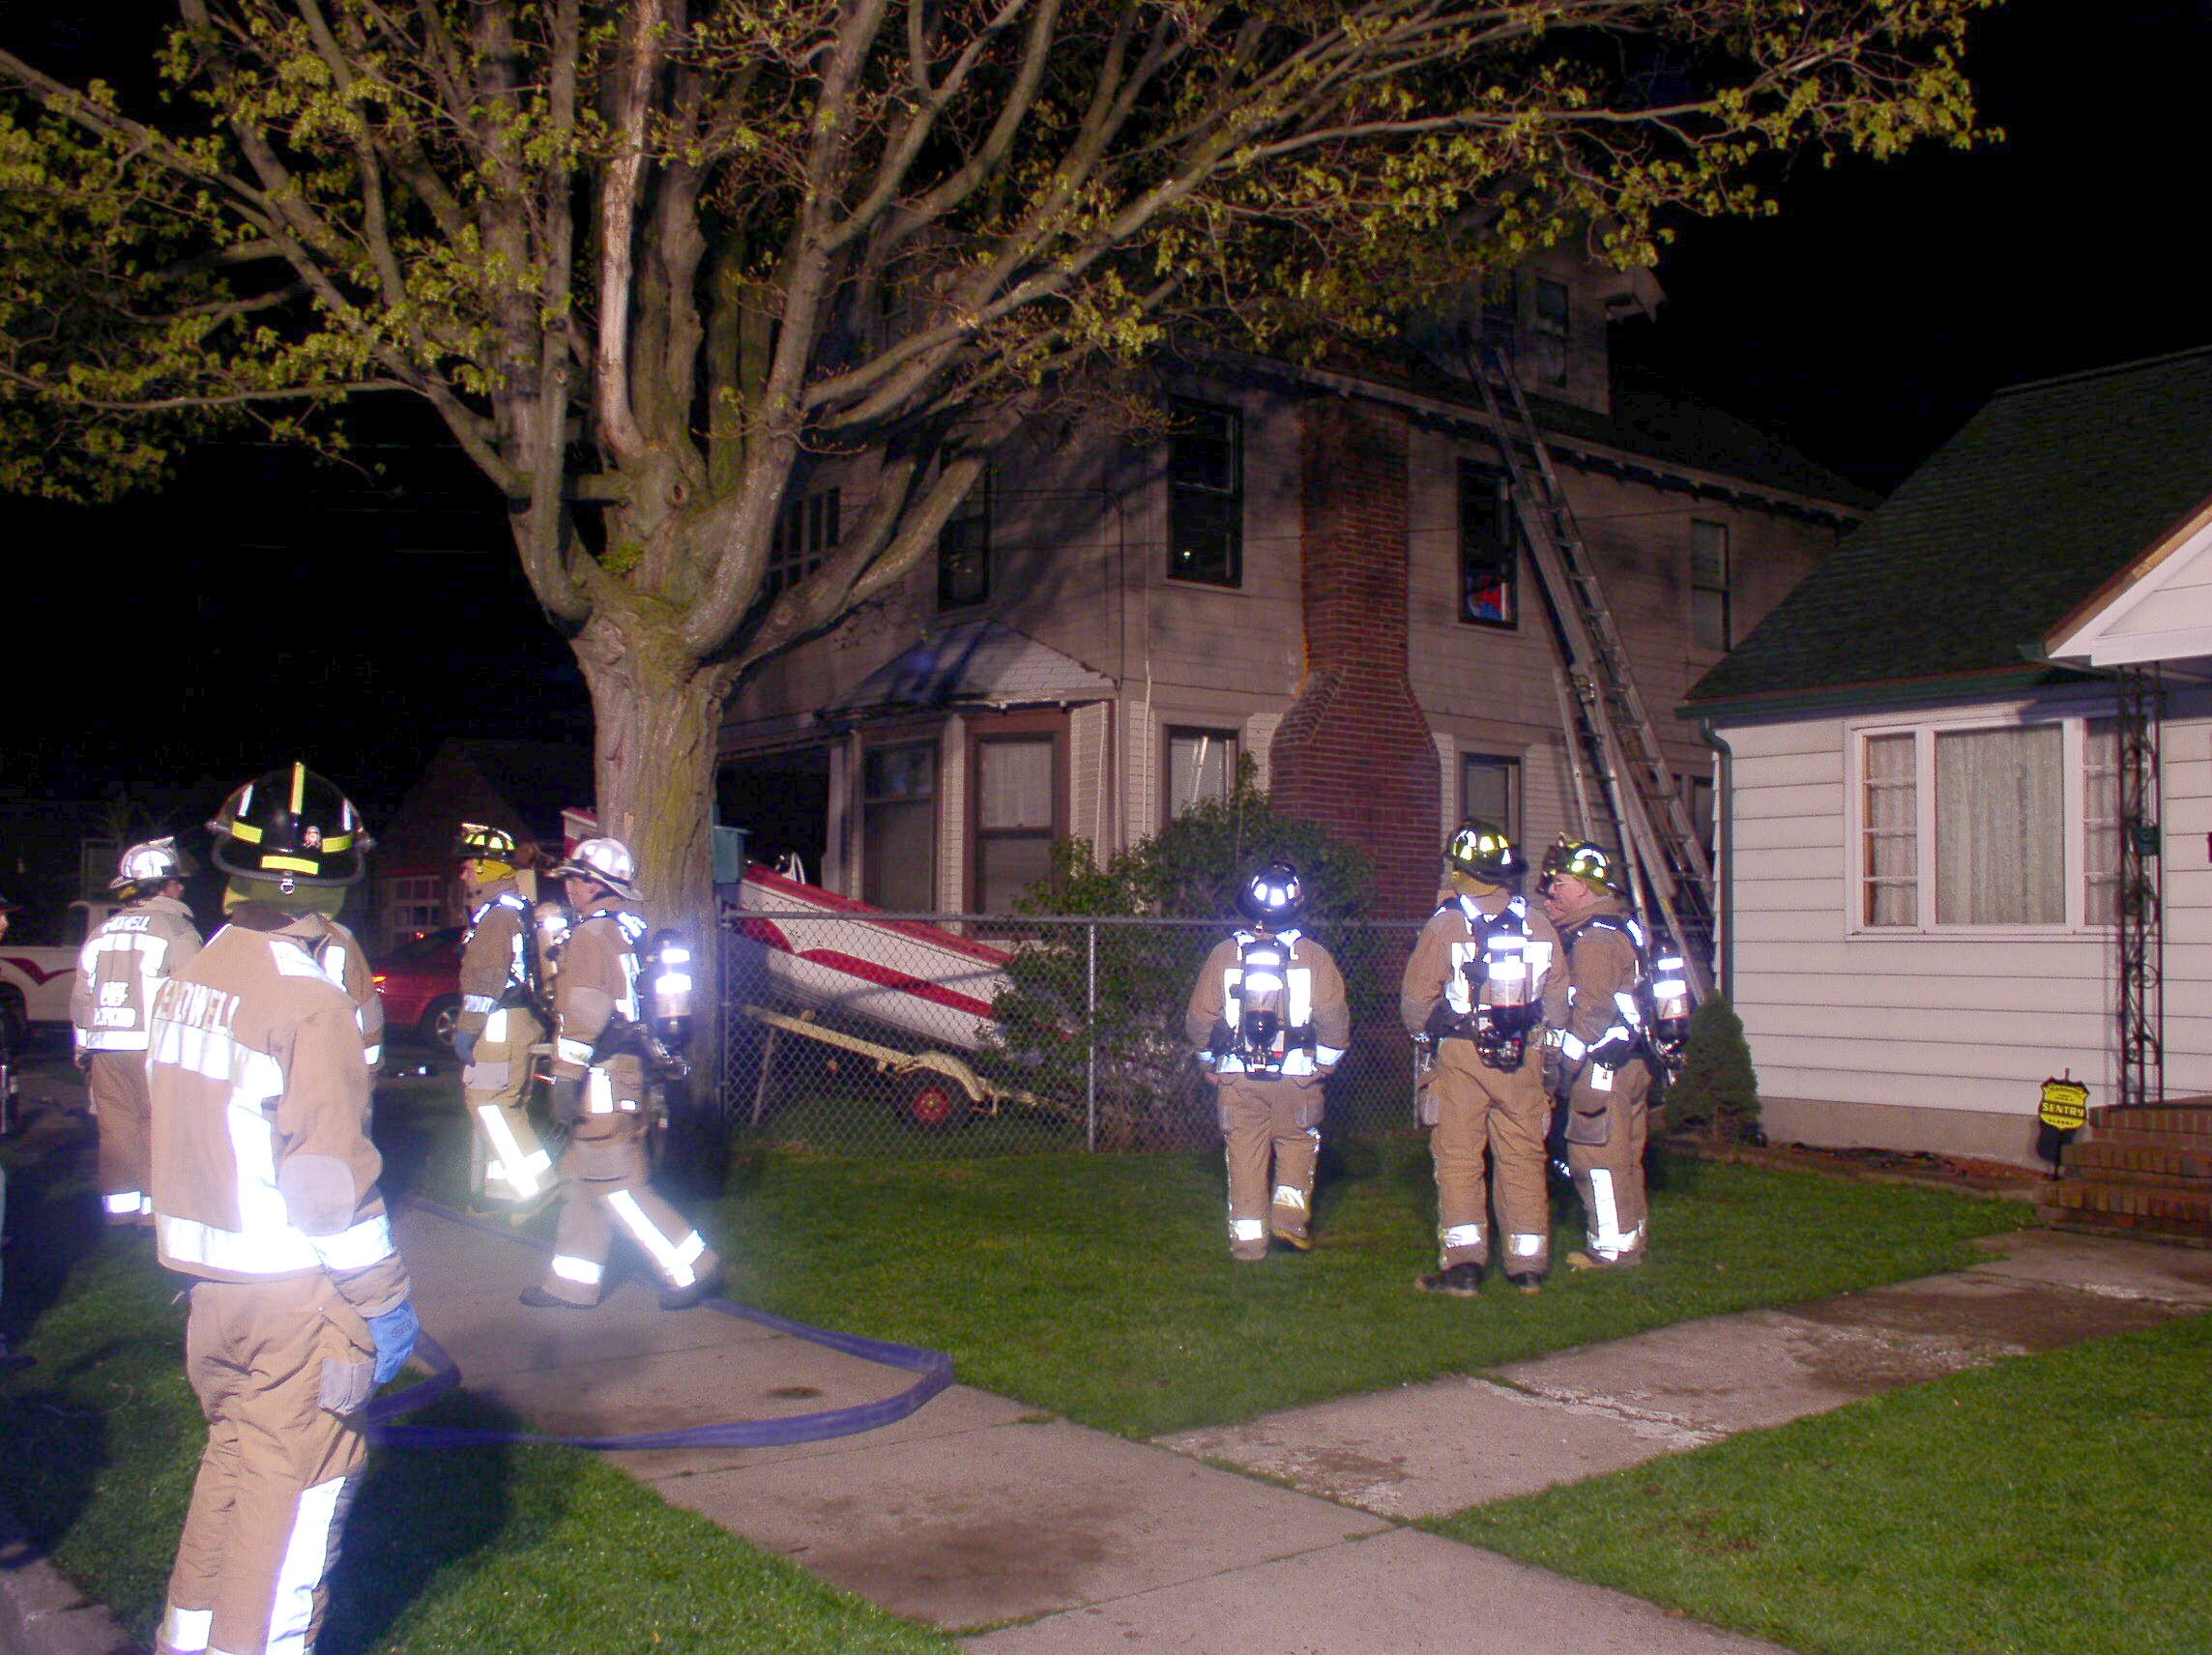 05-04-05  Reponse - Chimeny Fire - Youngs Ave